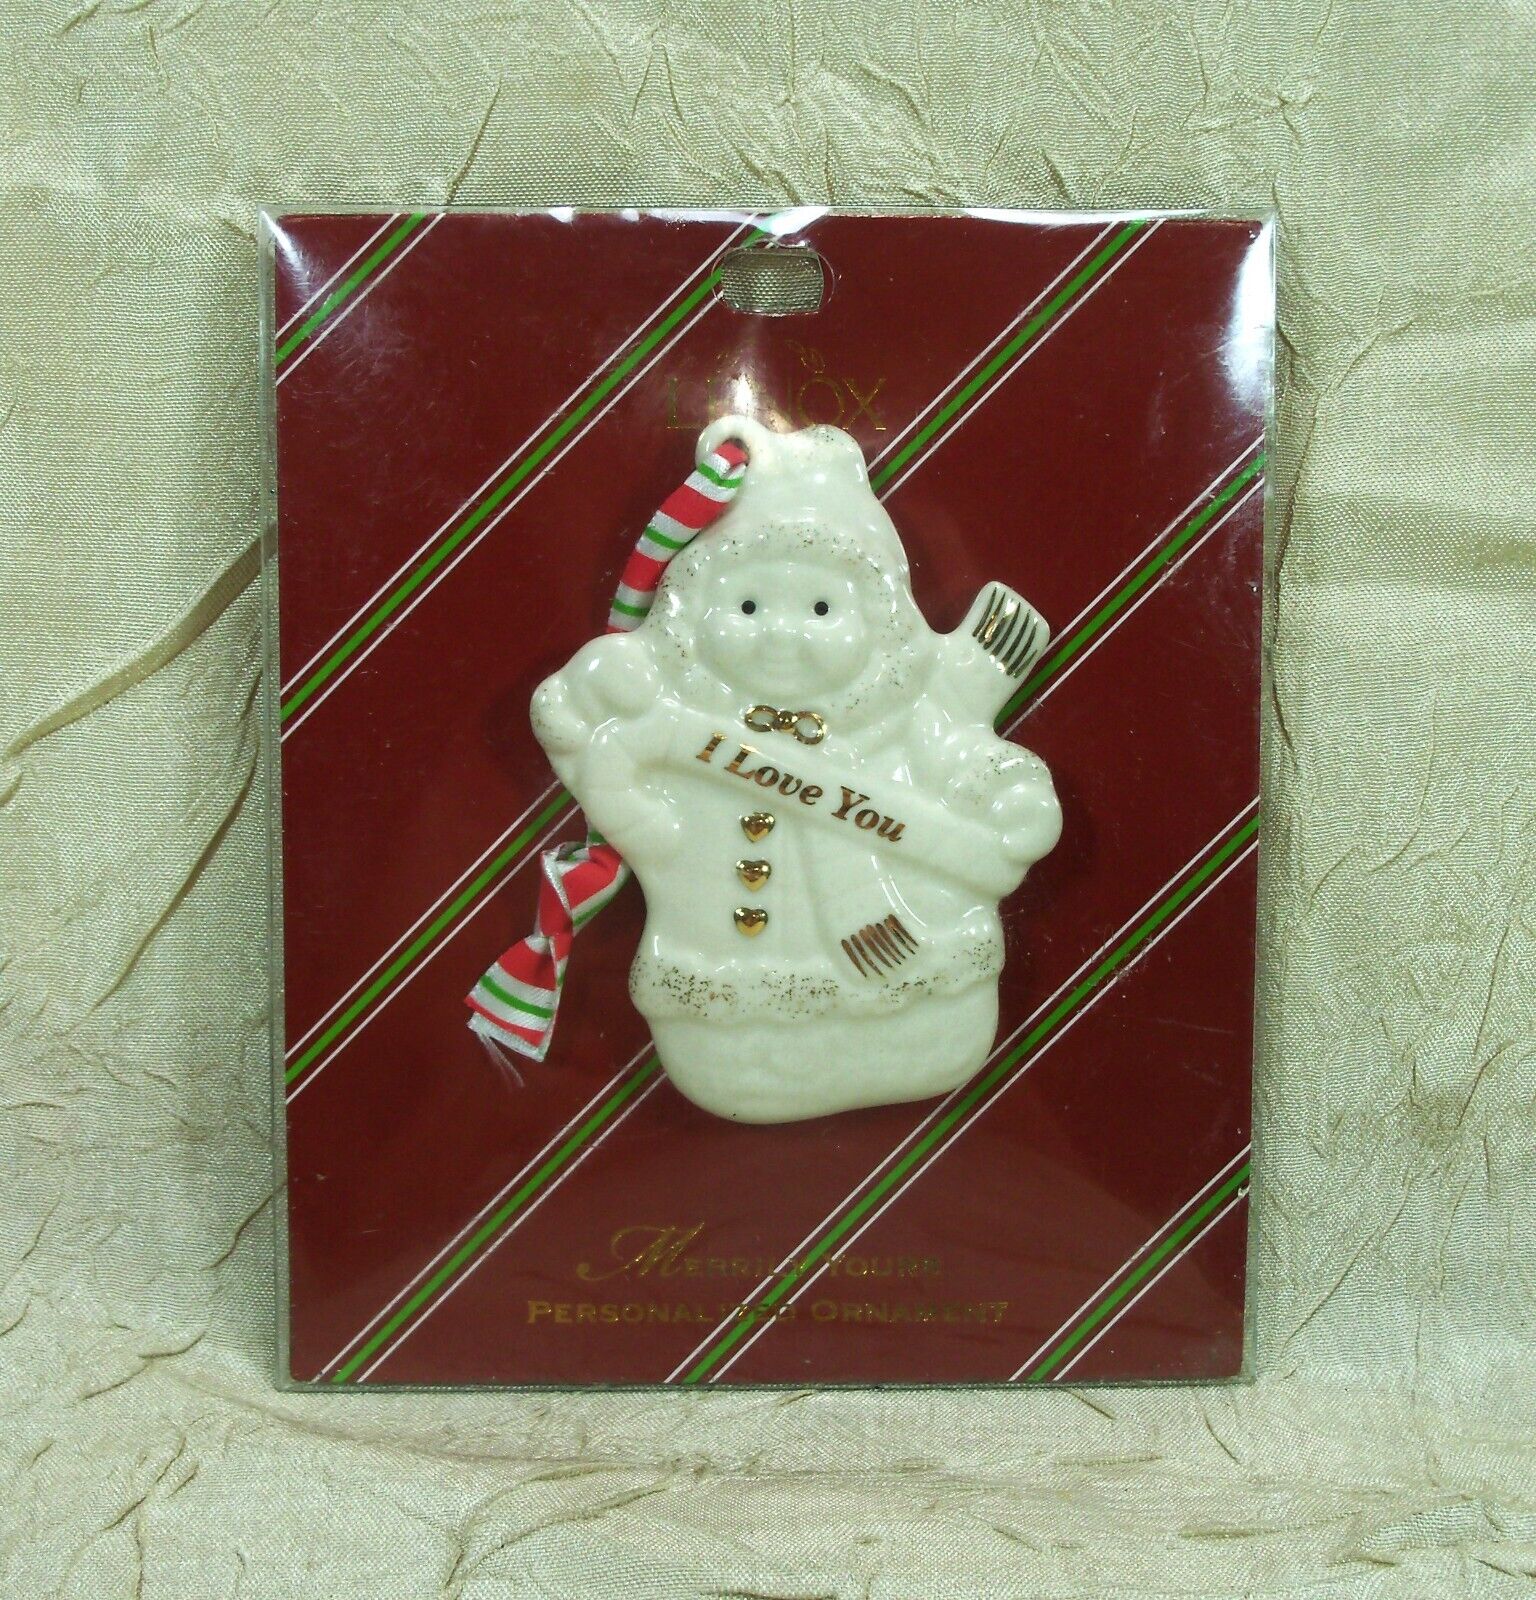 Lenox Brand Merrily Yours I Love You Ceramic Christmas Holiday Ornament New